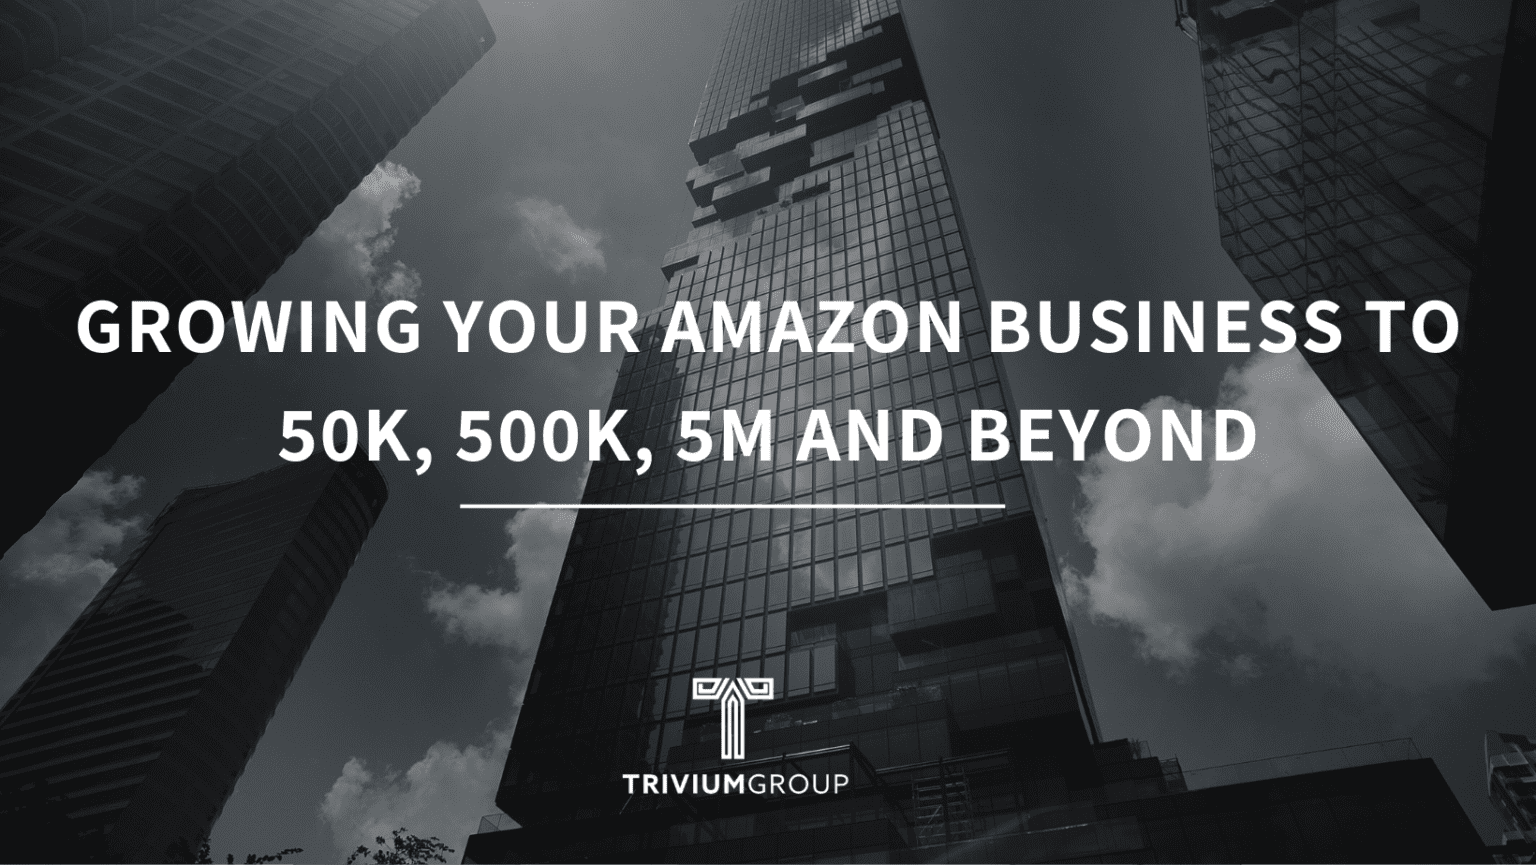 Growing Your Amazon Business To 50k, 500k, 5M And Beyond